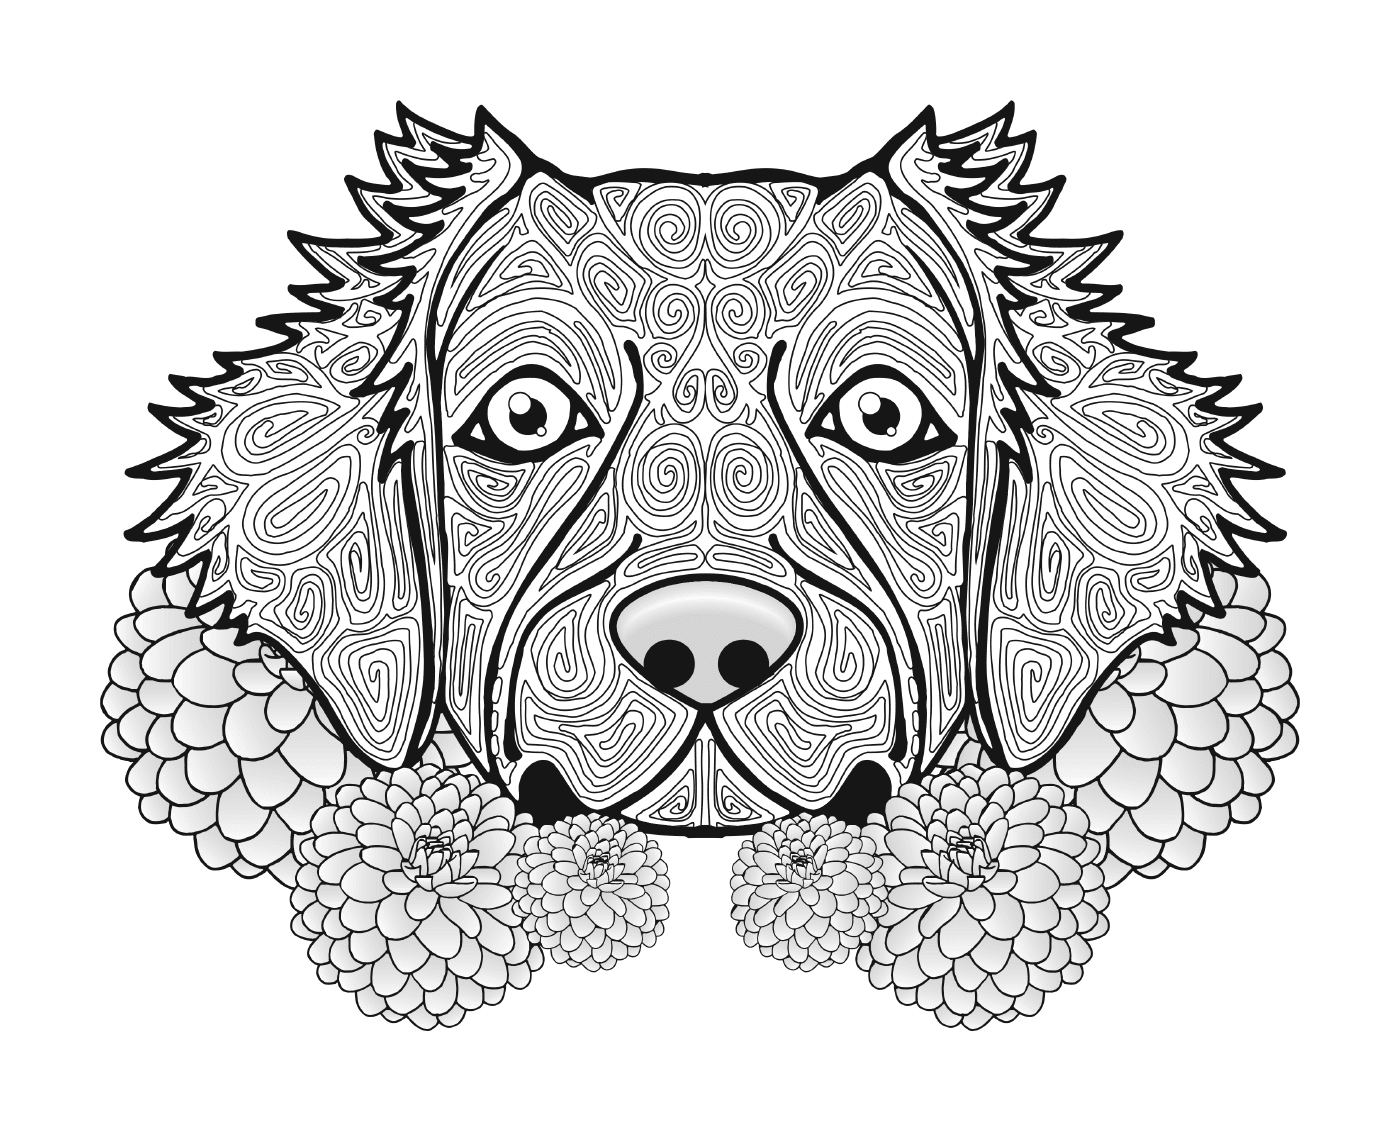  Dog with a dog face and flowers 